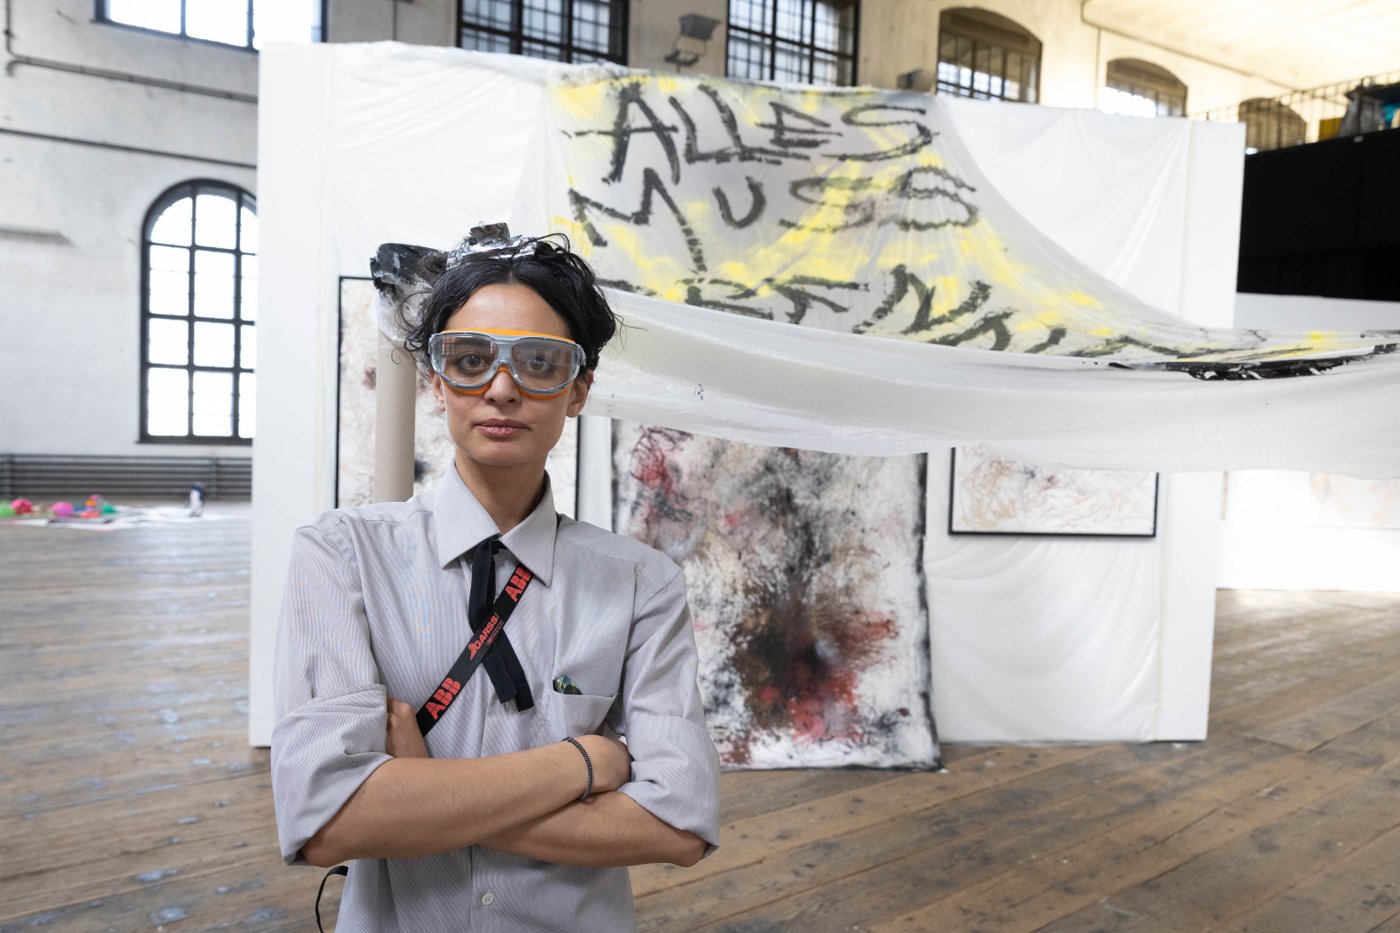 The artist in front of her work with secure glasses on and in the background there is a banner with the words "alles muss raus"